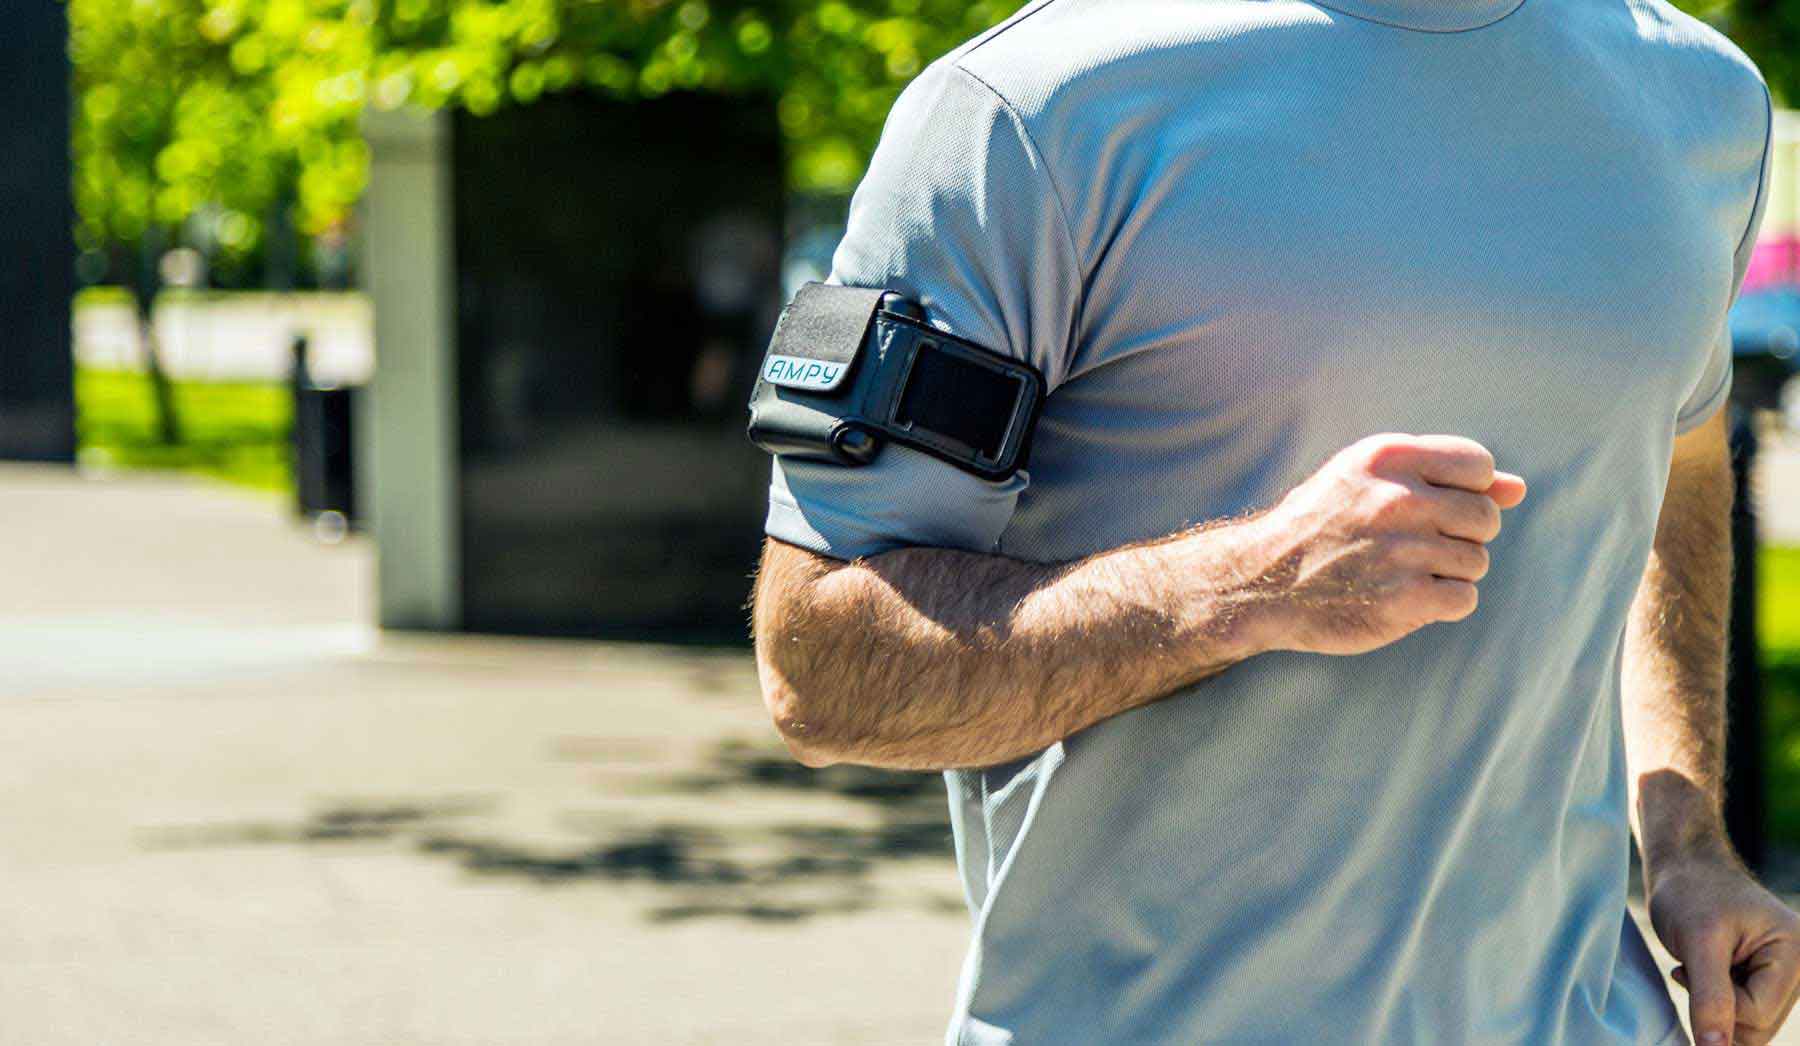 AMPY MOVE – The World’s First Wearable Motion Charger